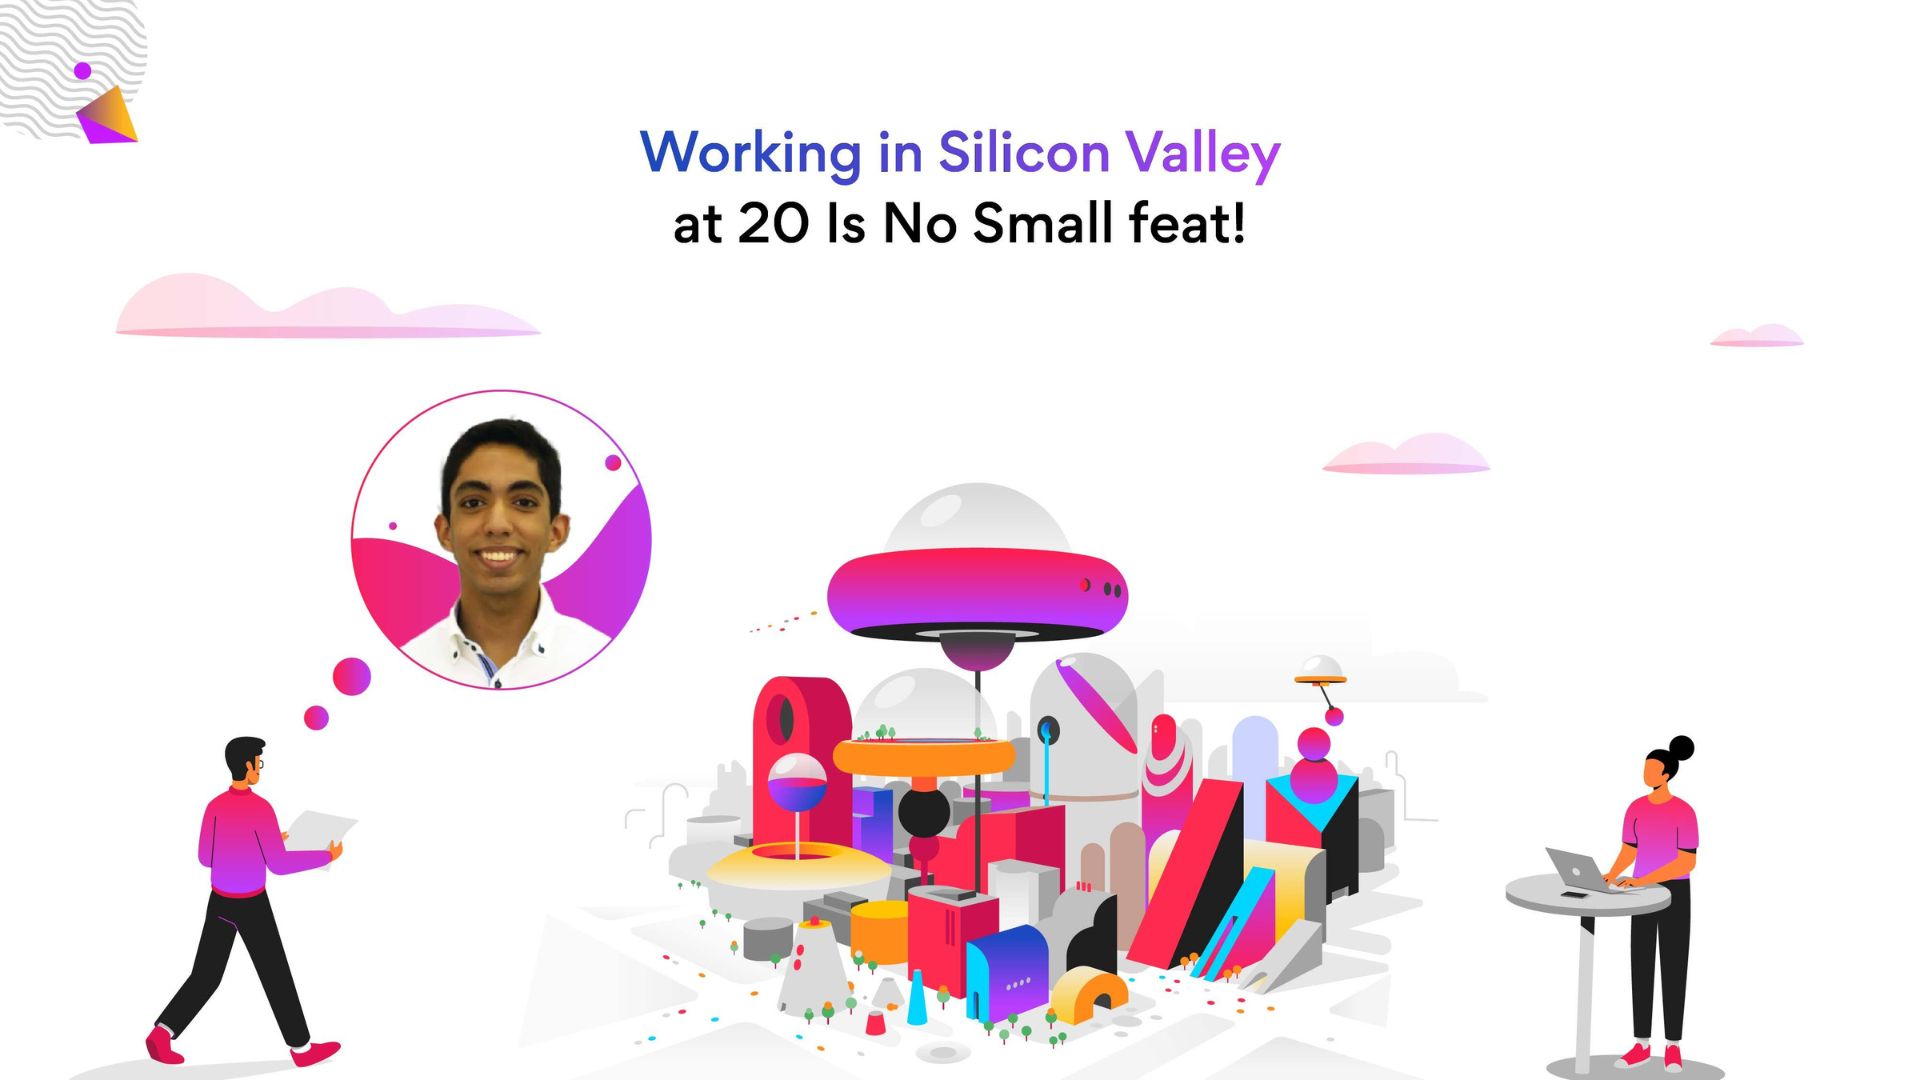 Turing jobs Working in Silicon Valley at 20 is no small feat!